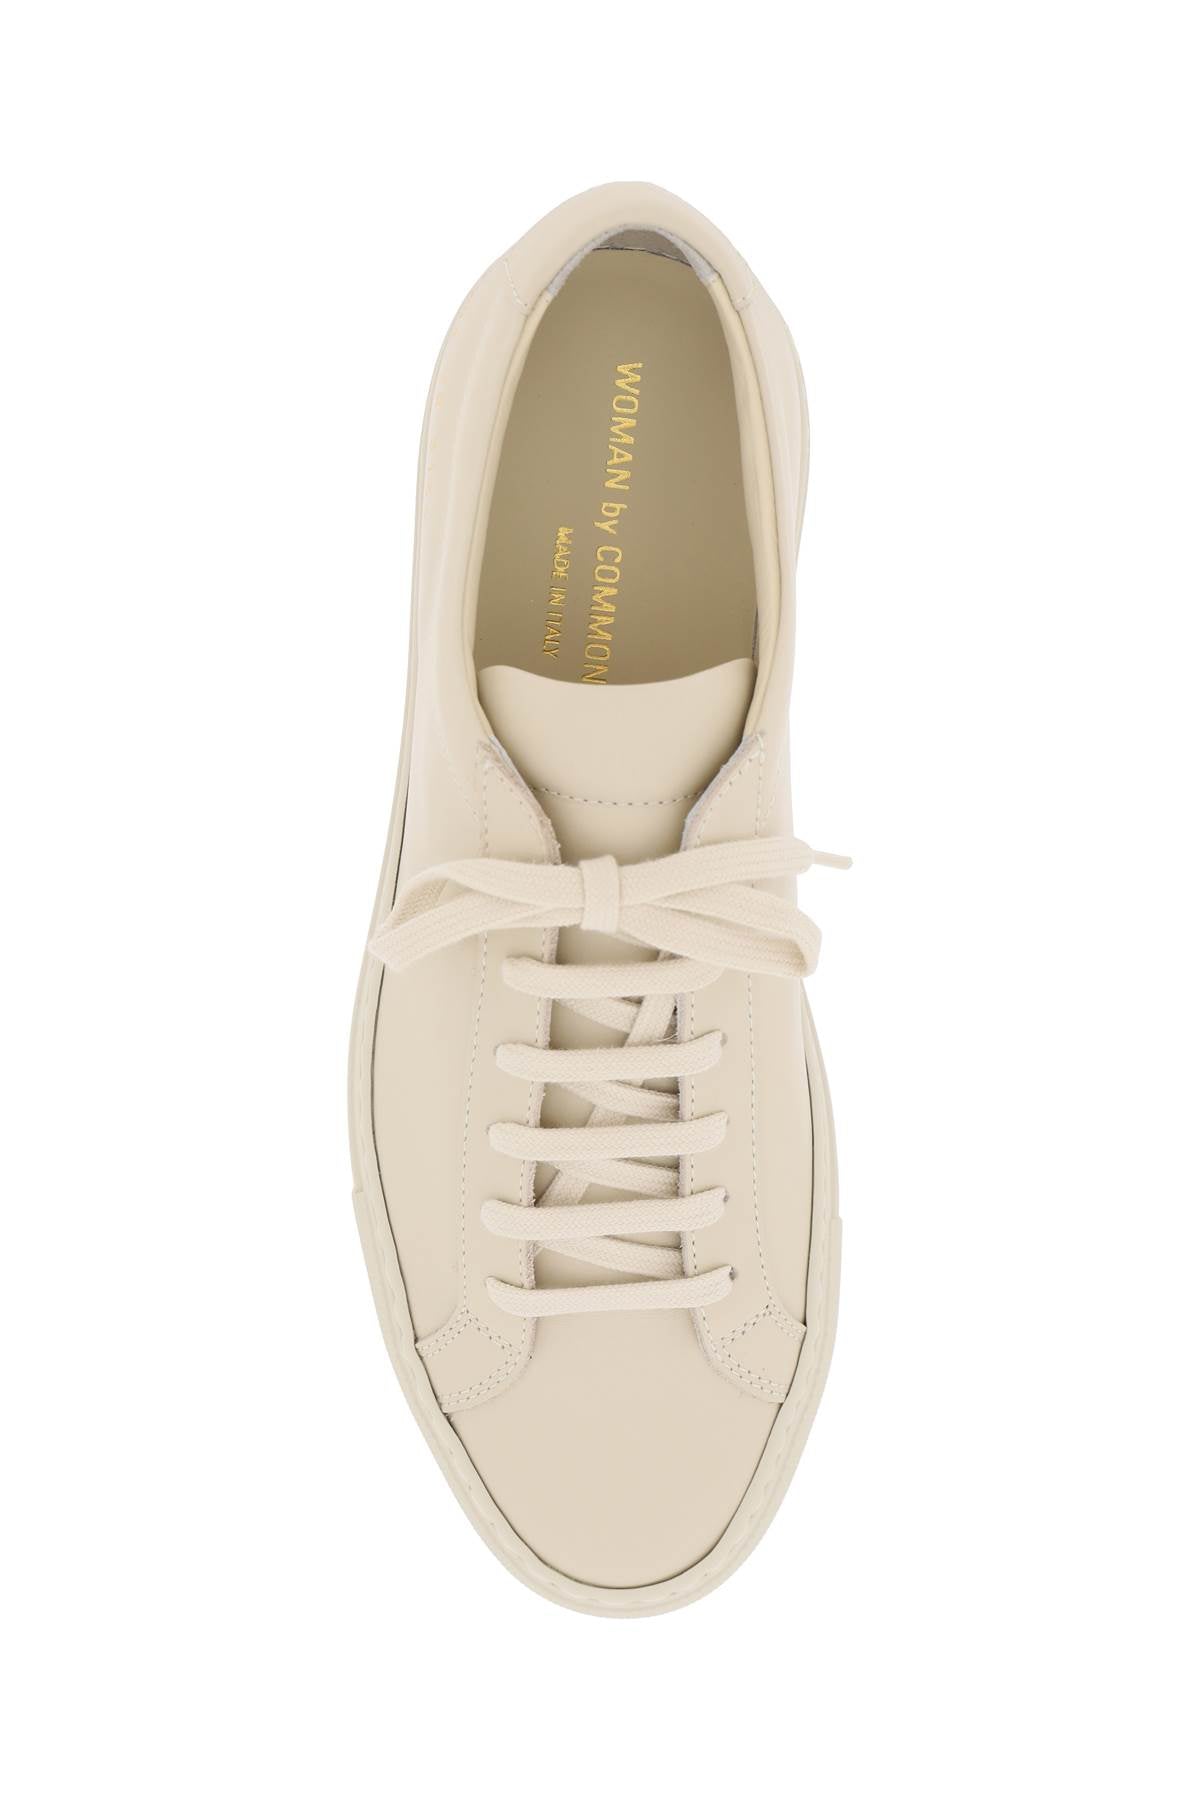 COMMON PROJECTS Luxurious Beige Leather Sneakers for Women